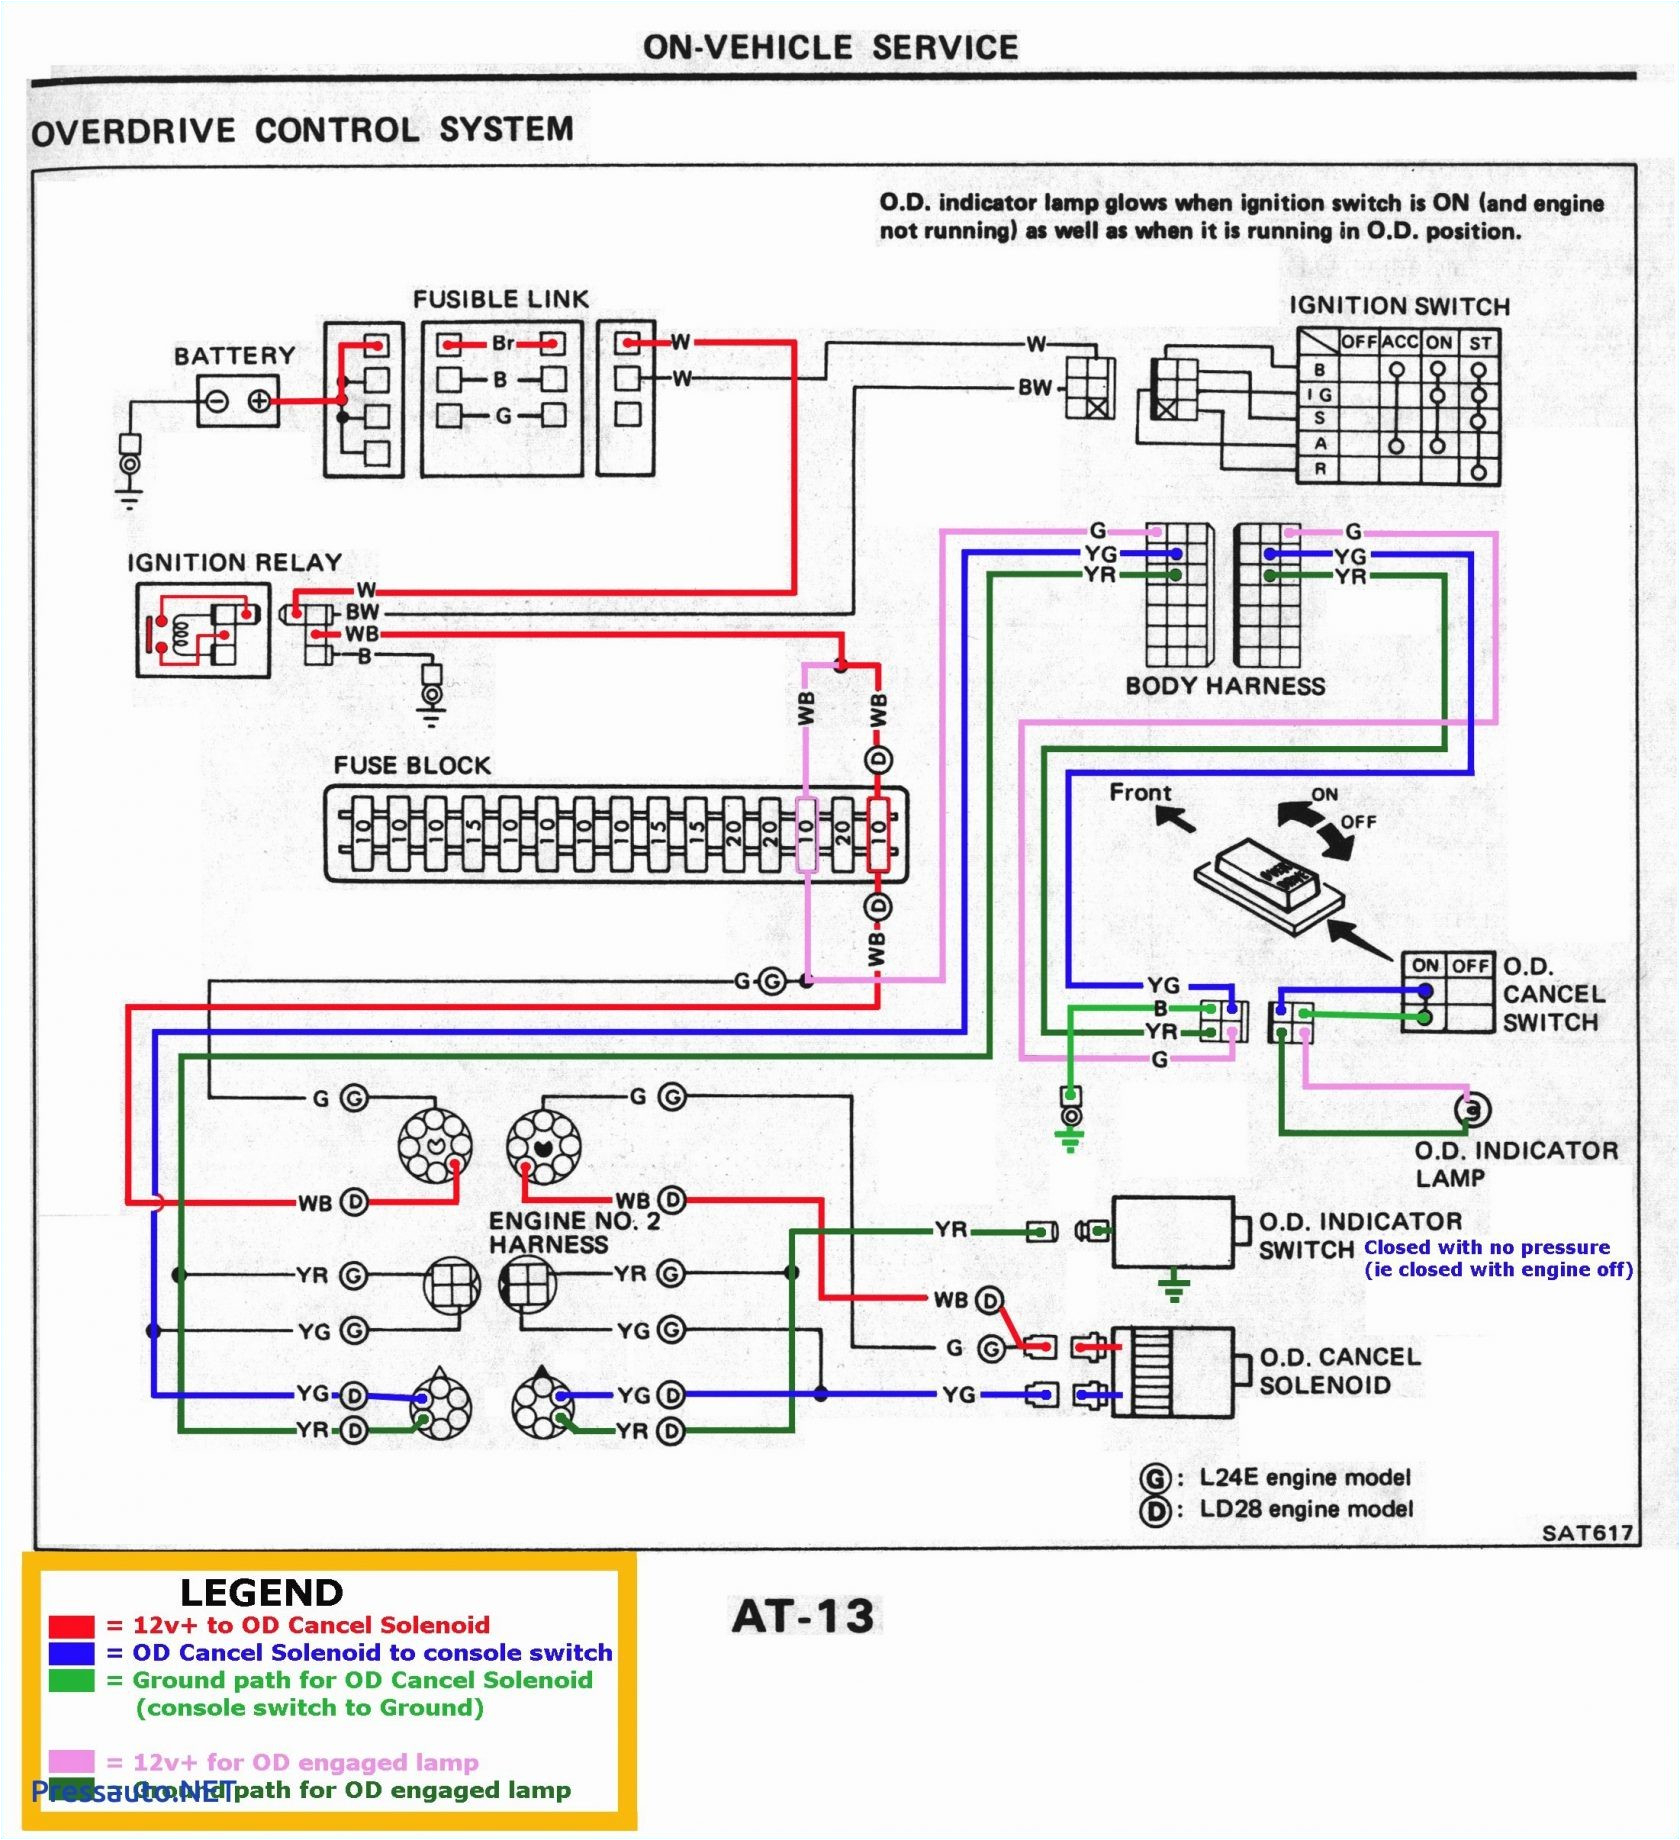 1995 Nissan Pickup Tail Light Wiring Diagram 1995 Chevy Silverado Tail Light Wiring Diagram Fokus